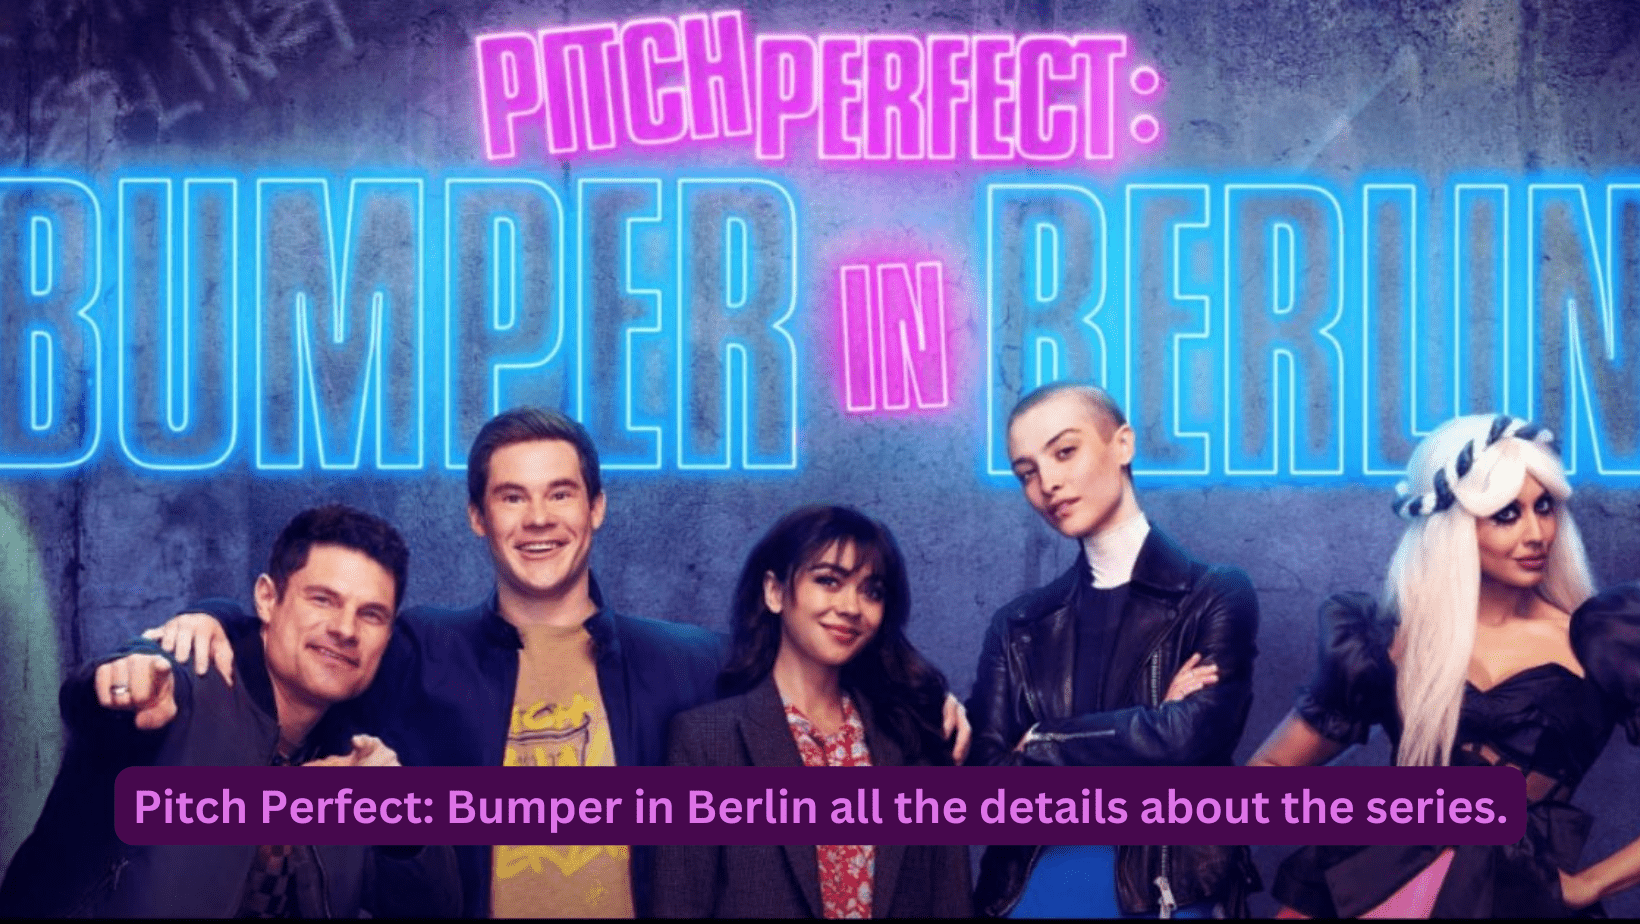 Pitch Perfect: Bumper in Berlin all the details about the series.